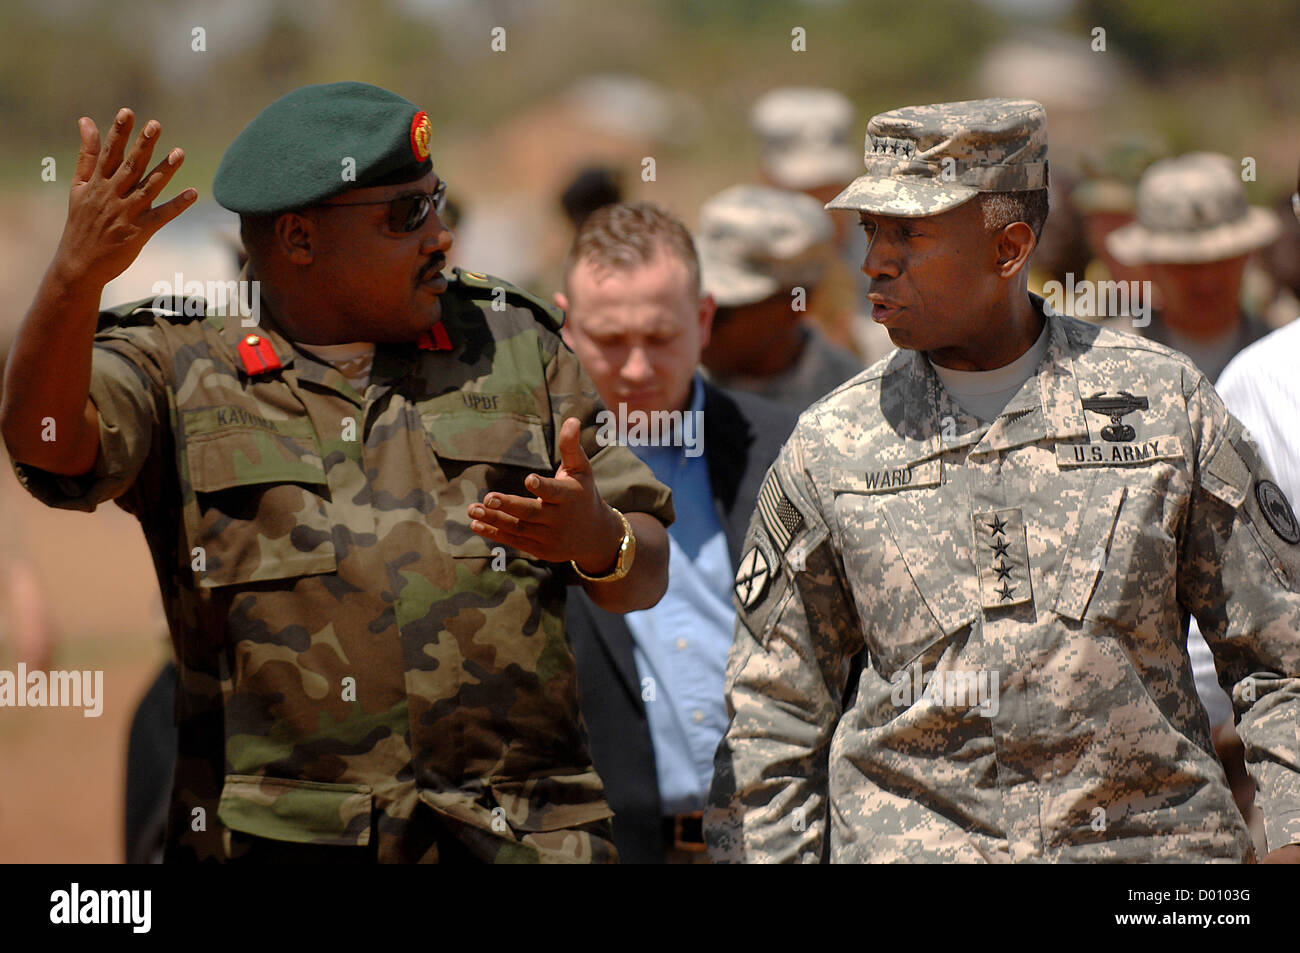 US Army General William Kip Ward,  Commander of US Africa Command talks with Ugandan People's Defense Force Col. Sam Kavuma while touring the Gulu district of Uganda April 10, 2008. Defense Secretary Leon Panetta has demoted Ward November 13, 2012 accused of spending thousands of dollars on lavish travel and other unauthorized expenses Stock Photo